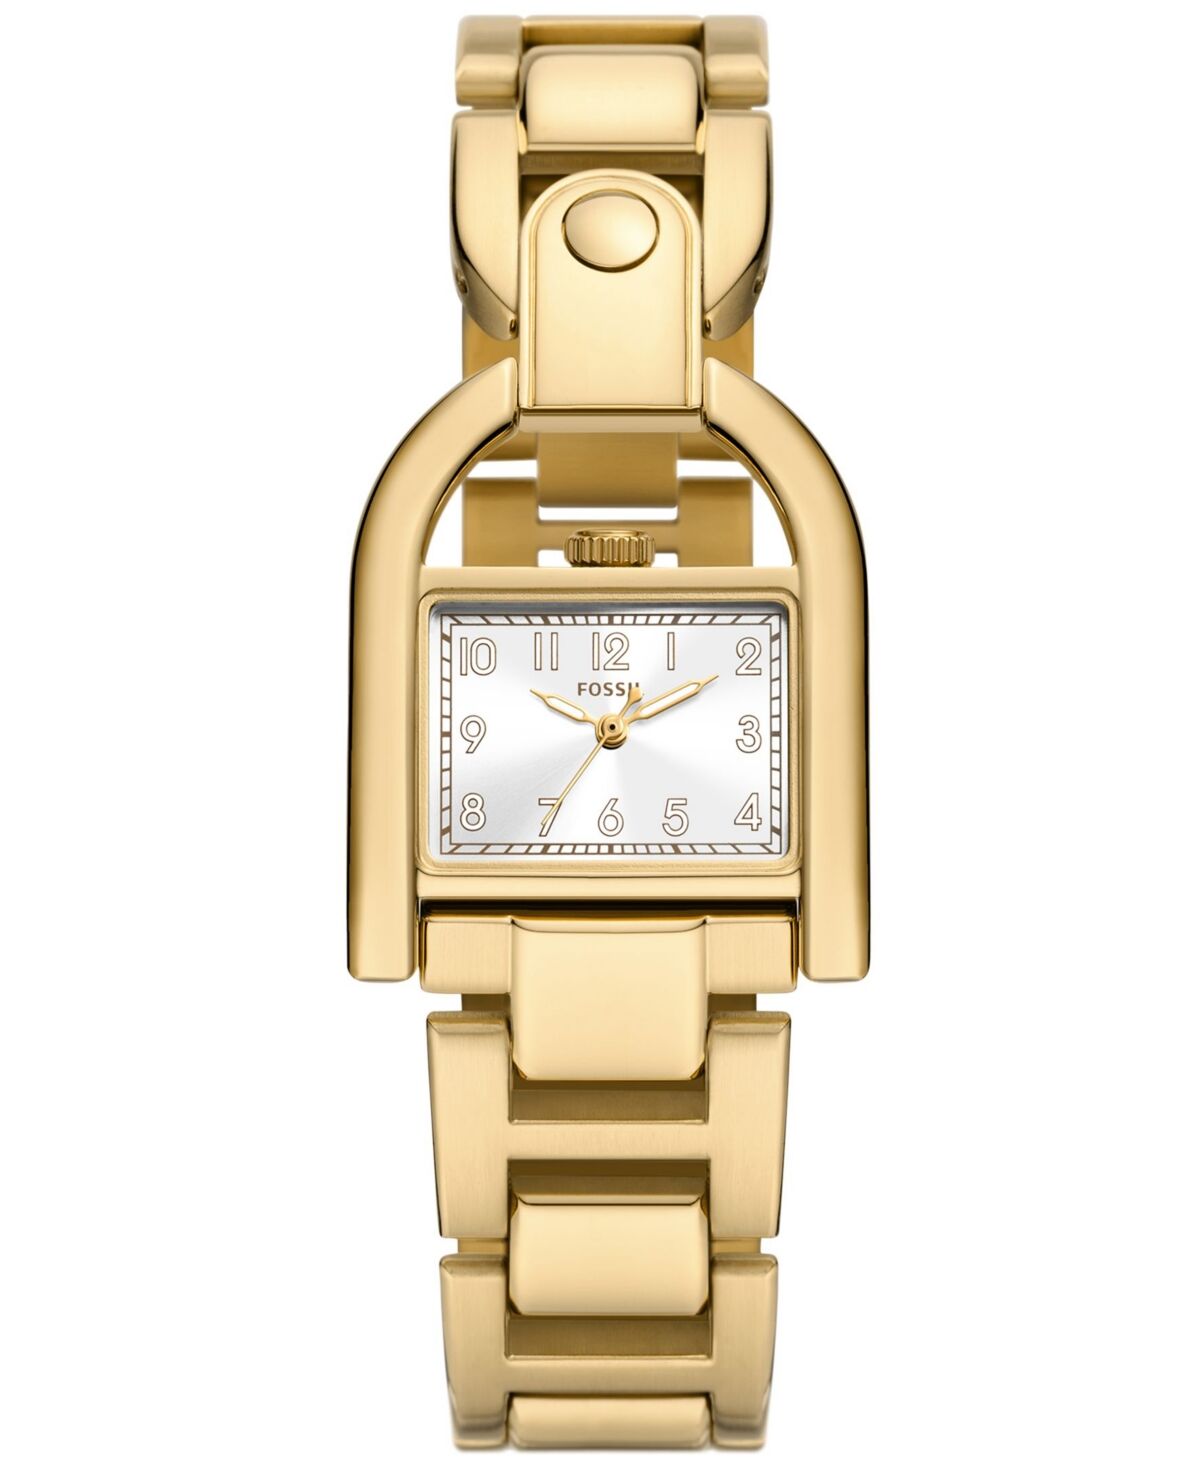 Fossil Women's Harwell Three-Hand Gold-Tone Stainless Steel Watch 28mm - Gold-Tone